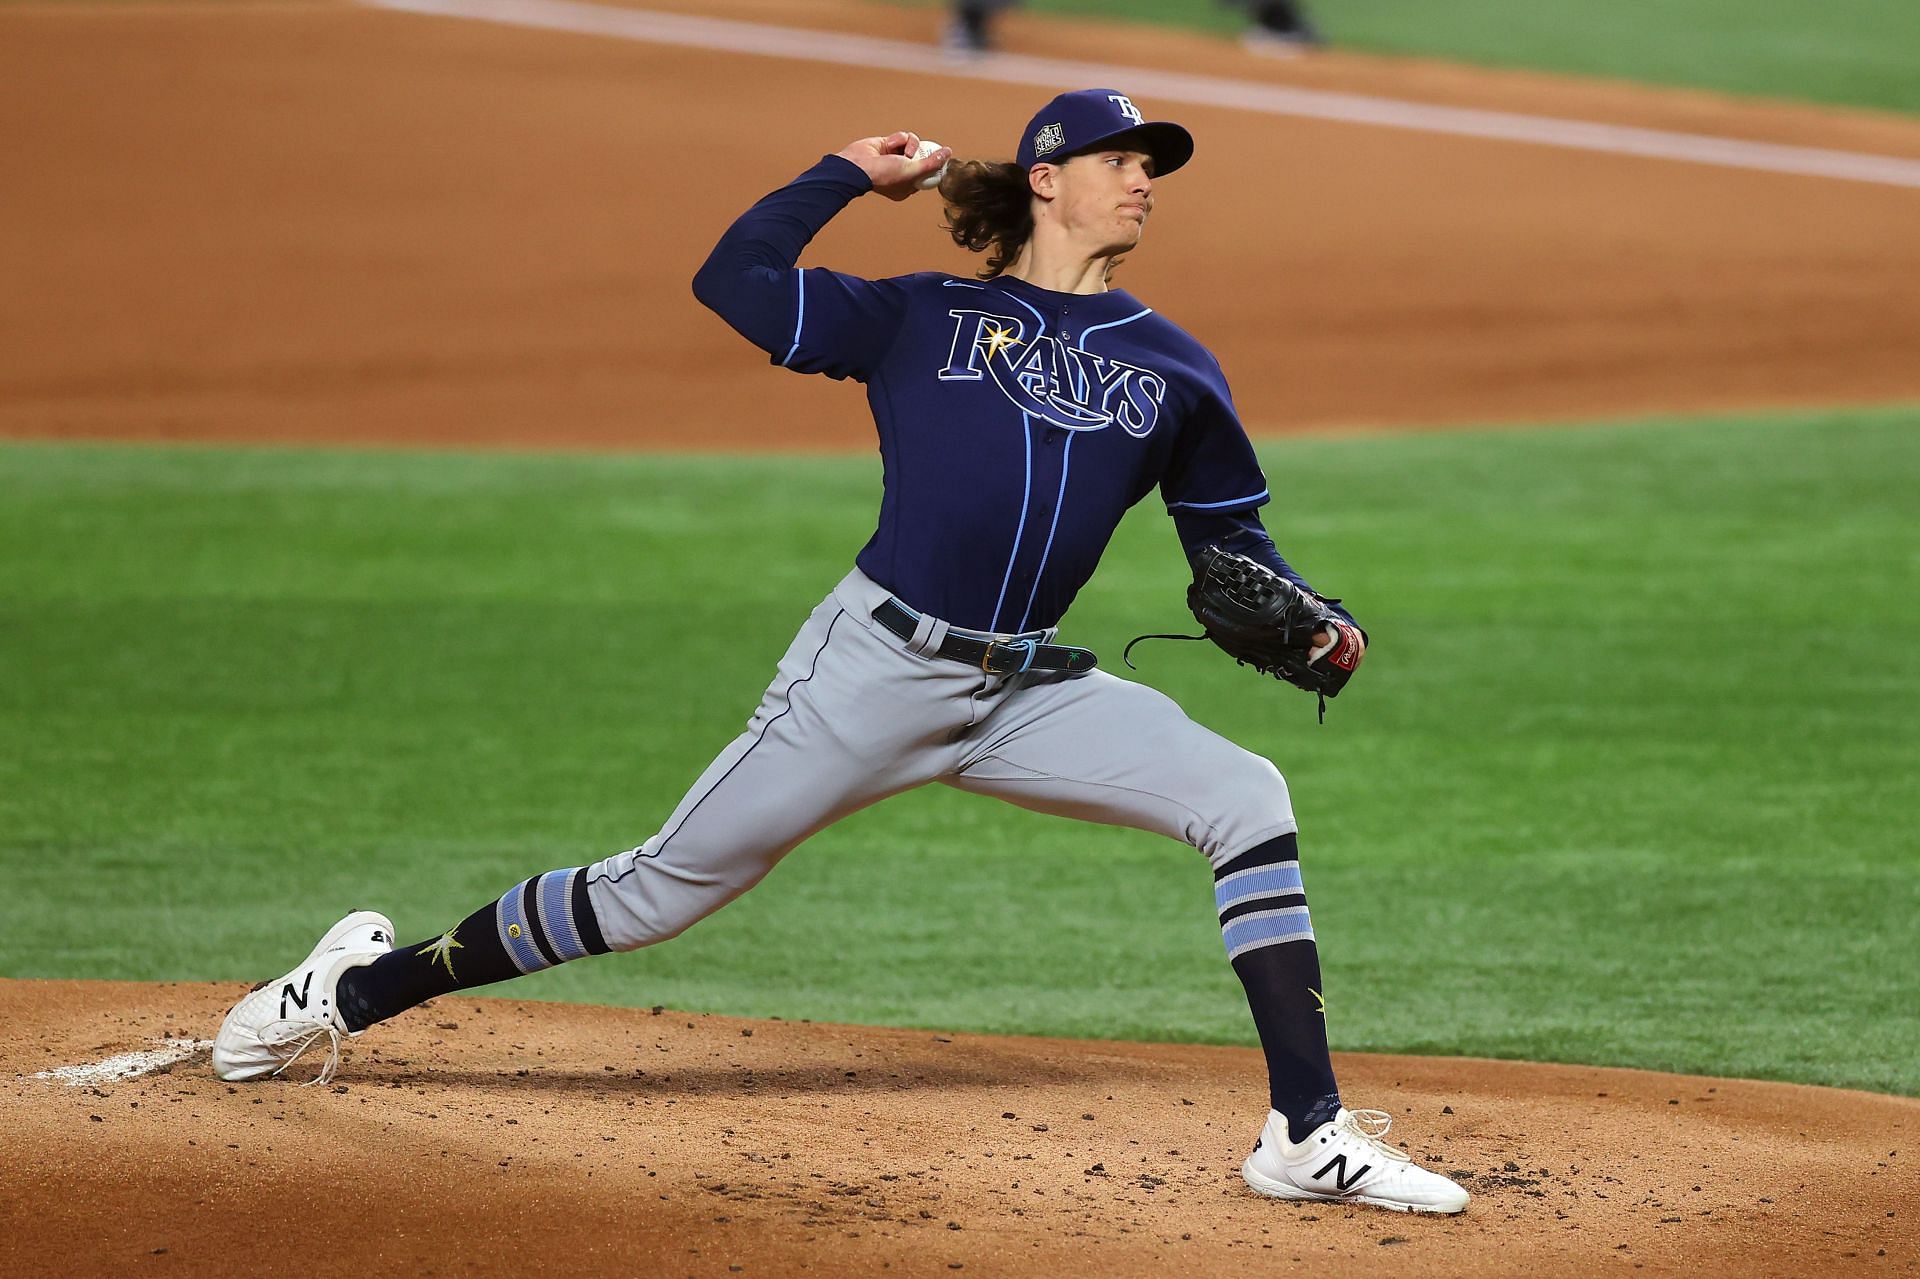 Sizing up Rays' Tyler Glasnow: From spin rate to family matters